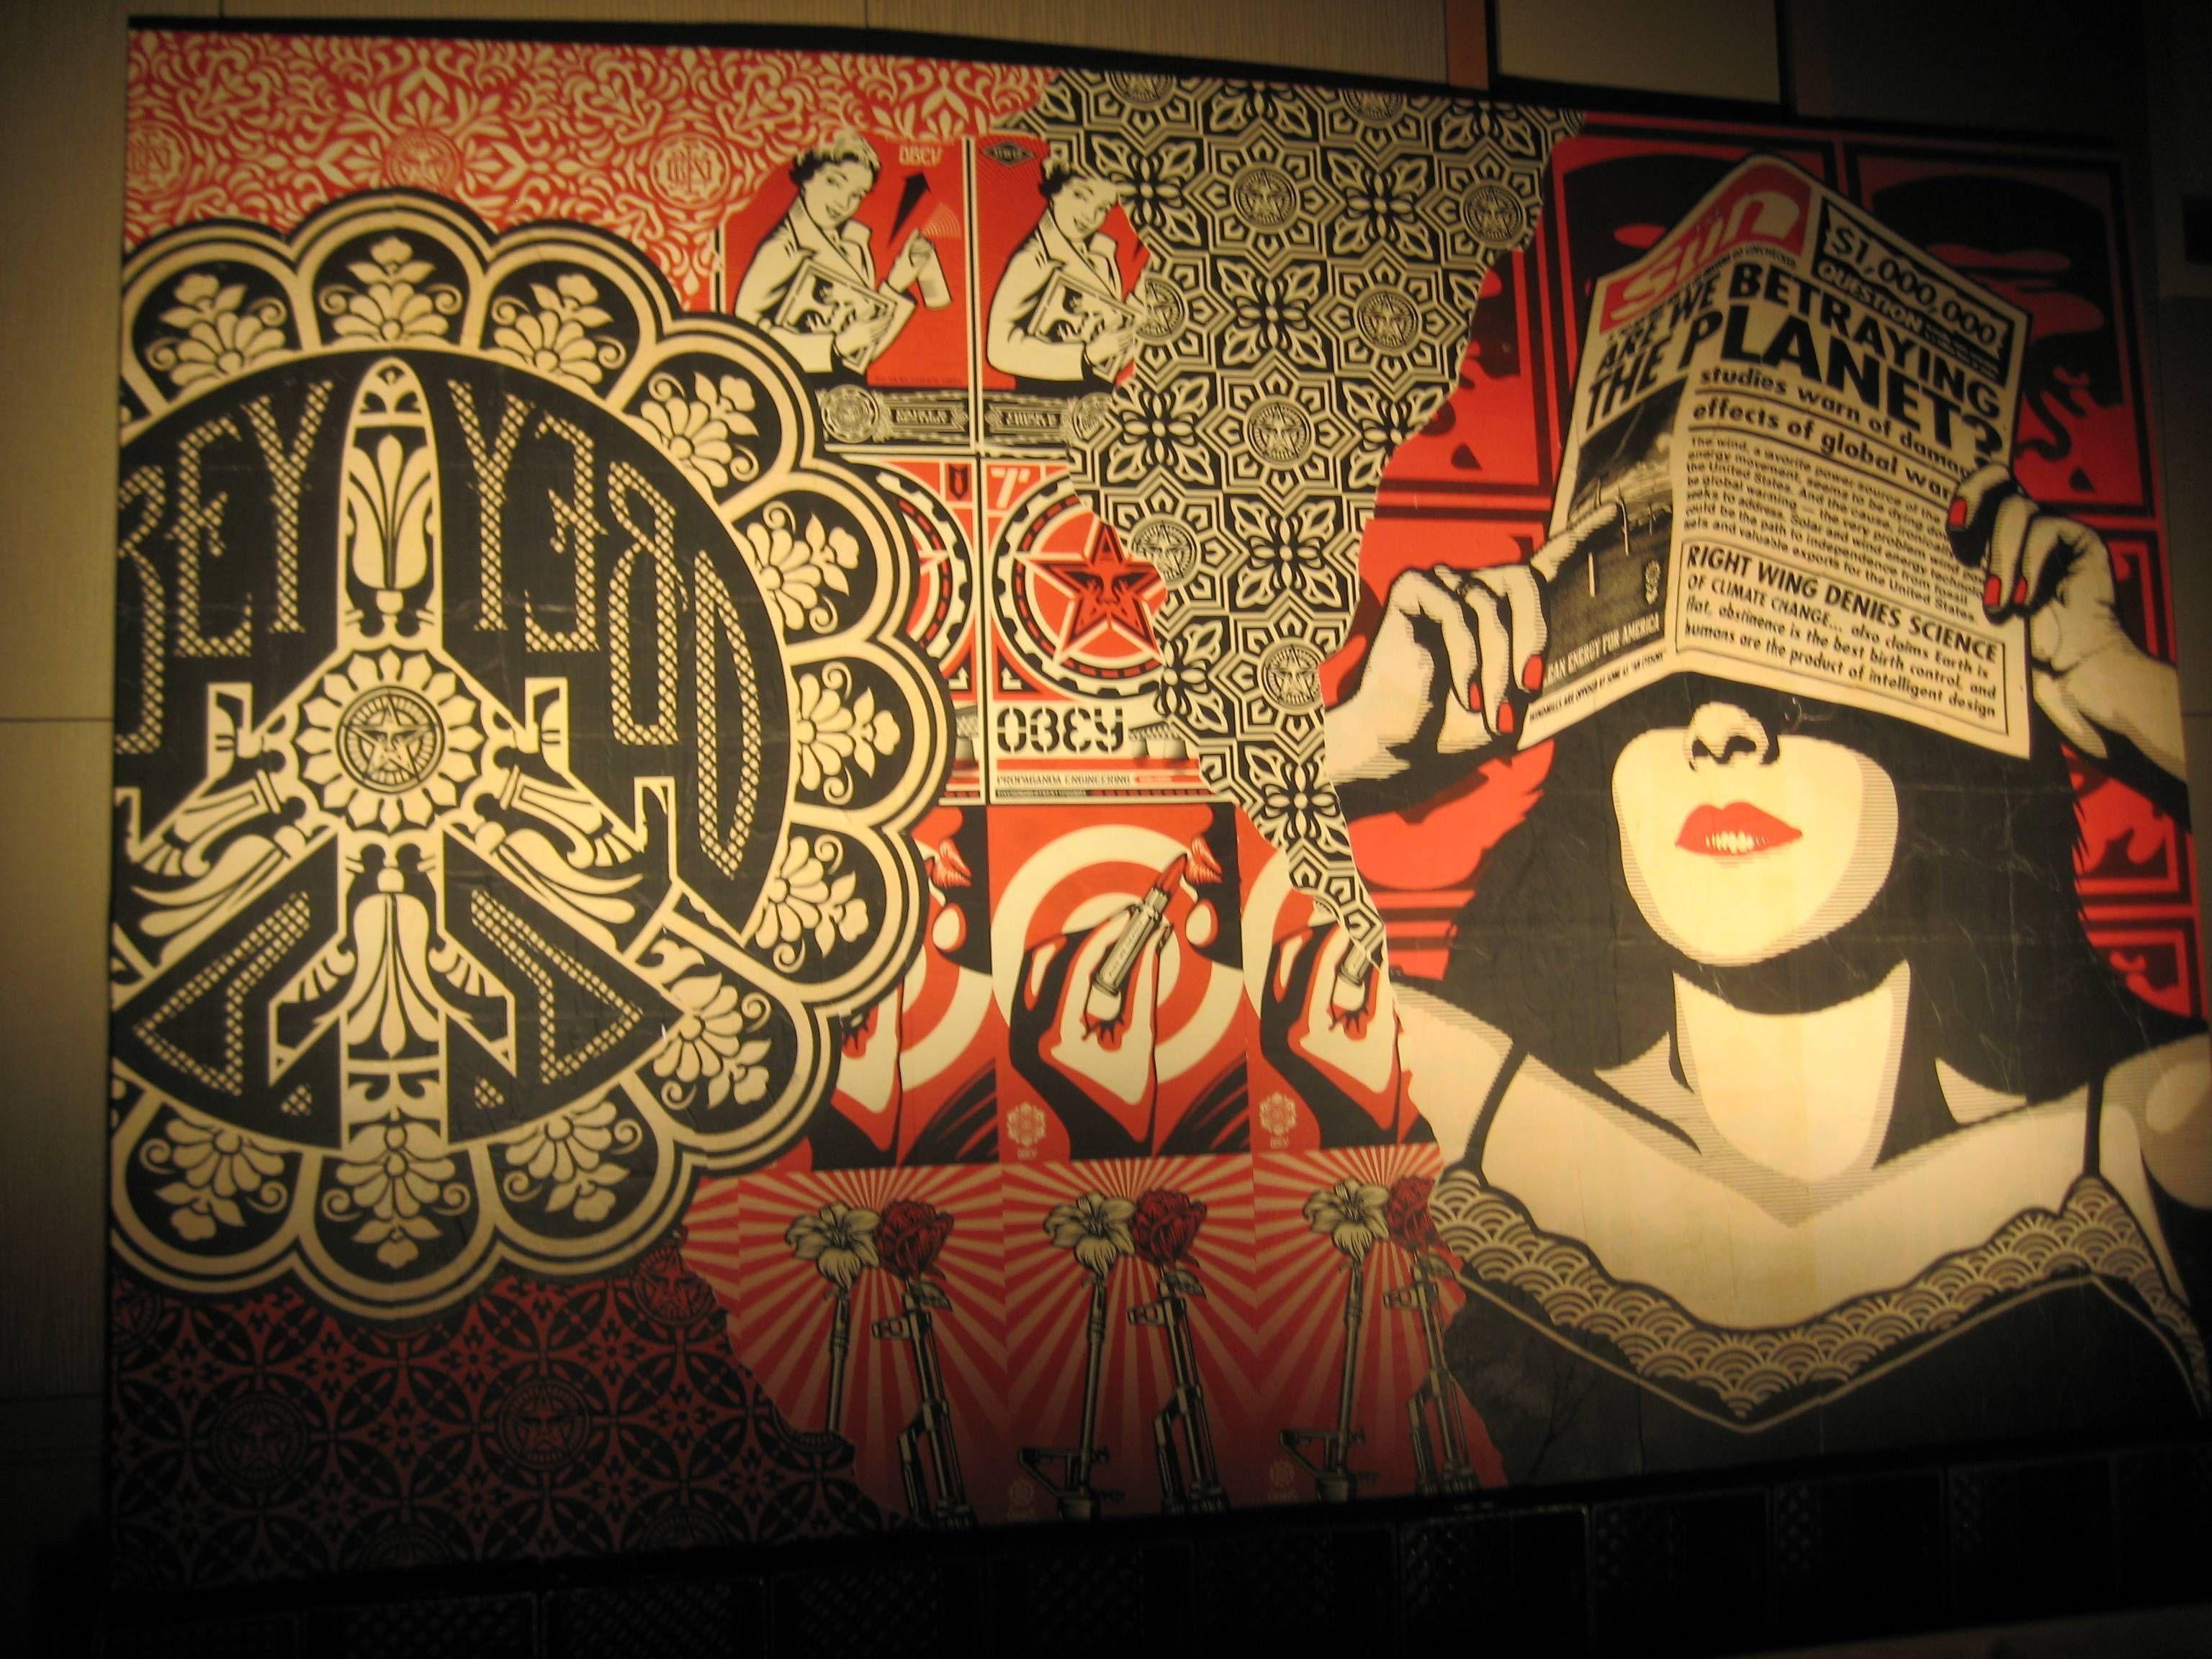 obey wallpaper backgrounds